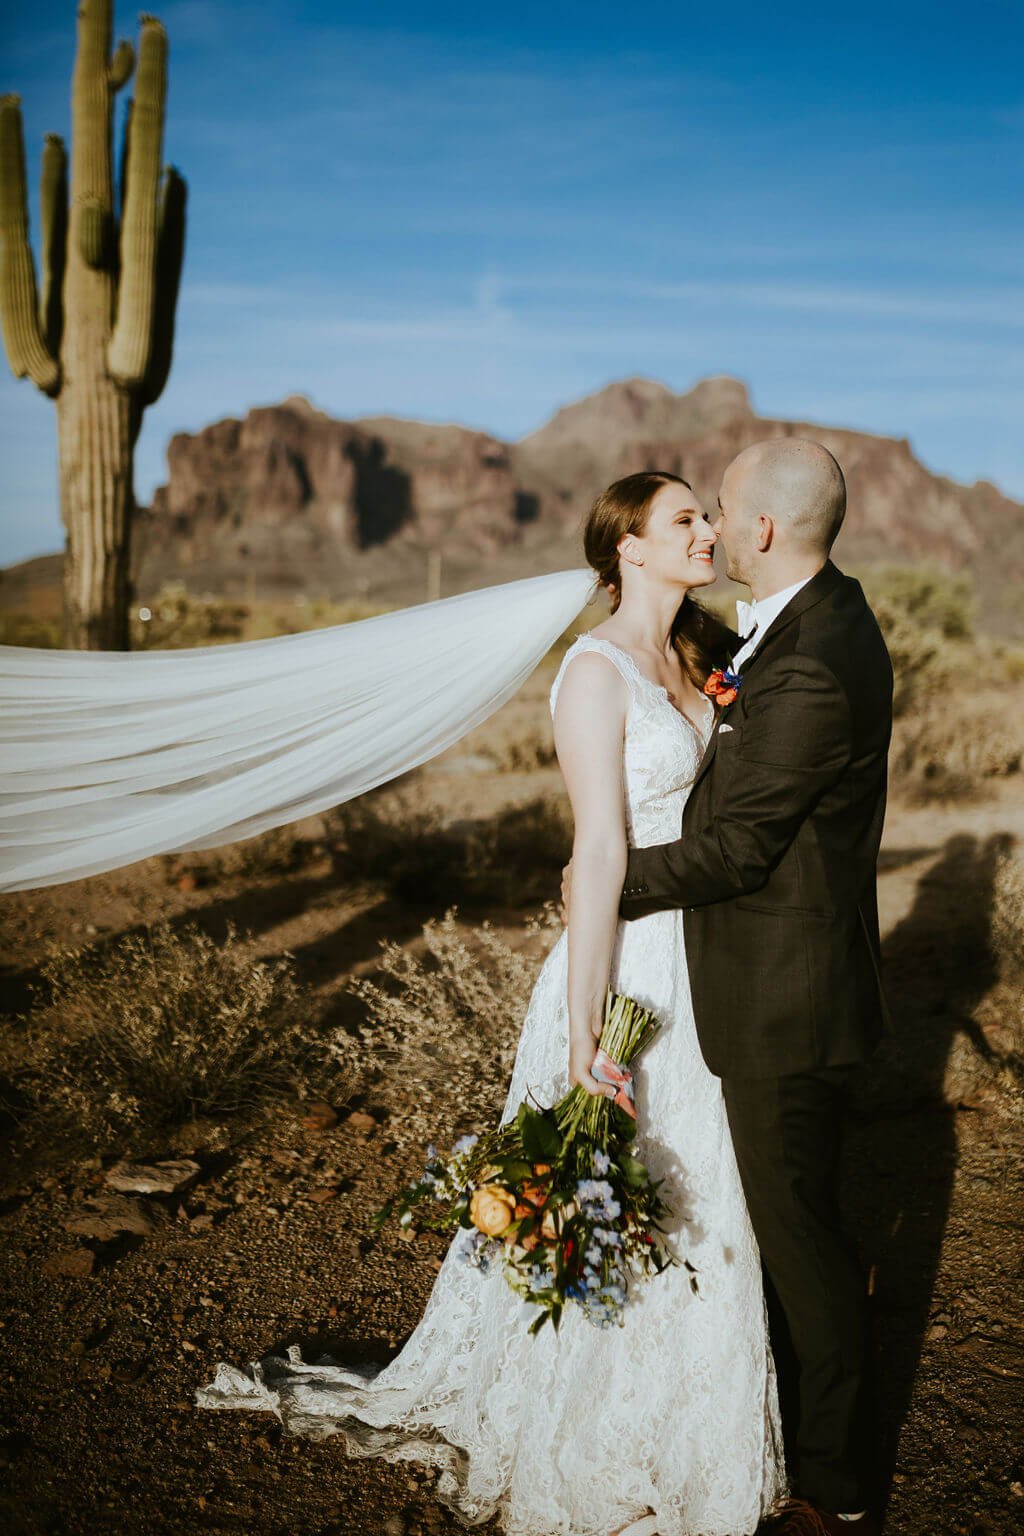 Bride and groom kissing in the desert with cactus and mountains in the background